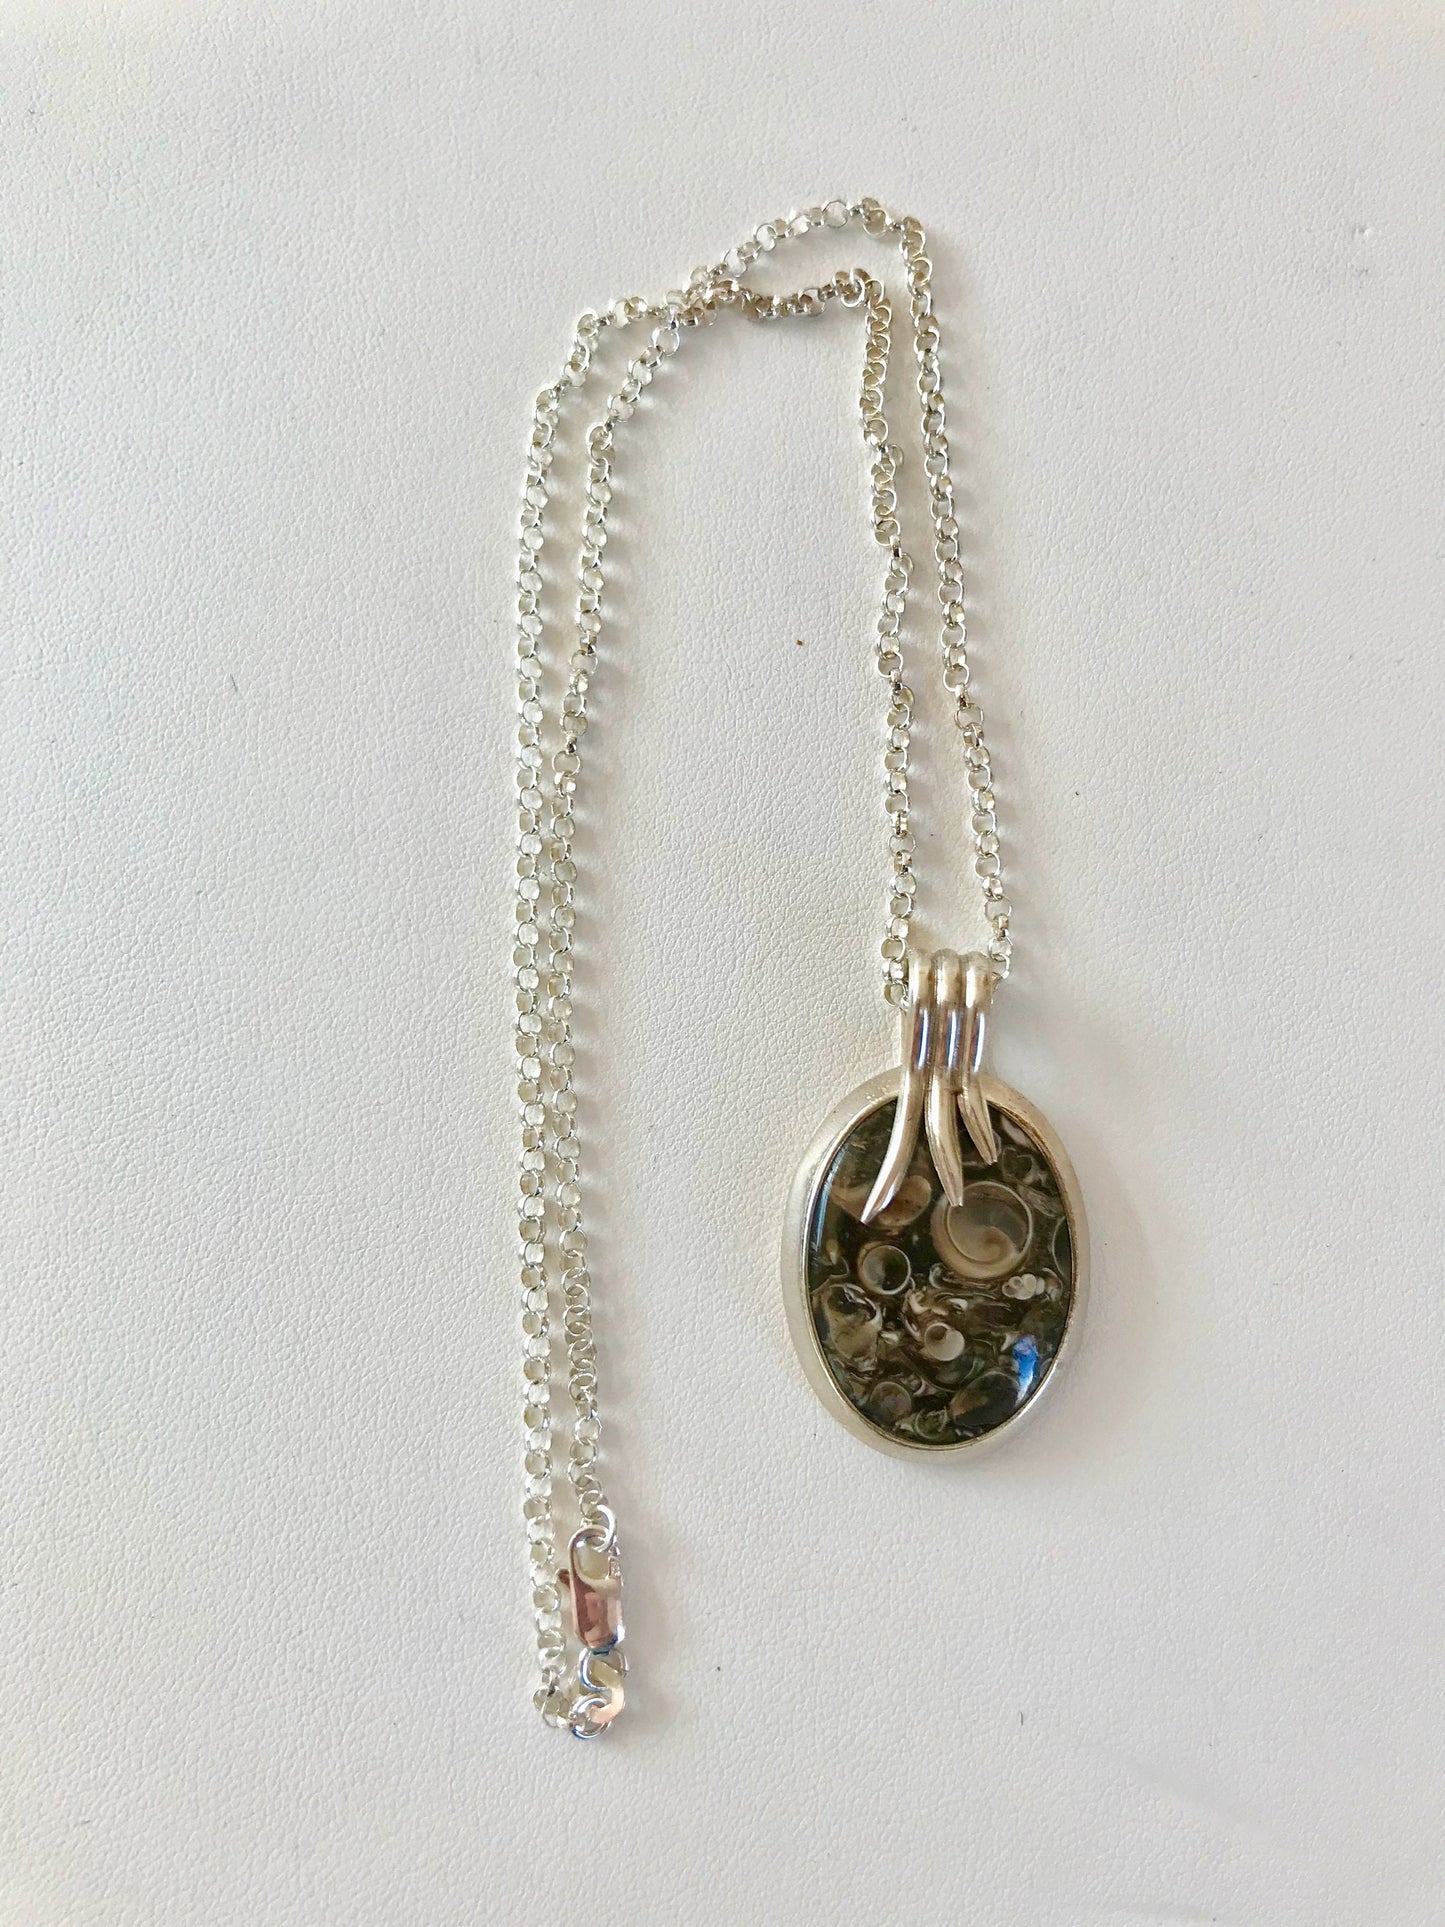 Beautiful Turritella Agate stone strung on a quality sterling silver chain. Gift for women, birthday gift, gift for anything!